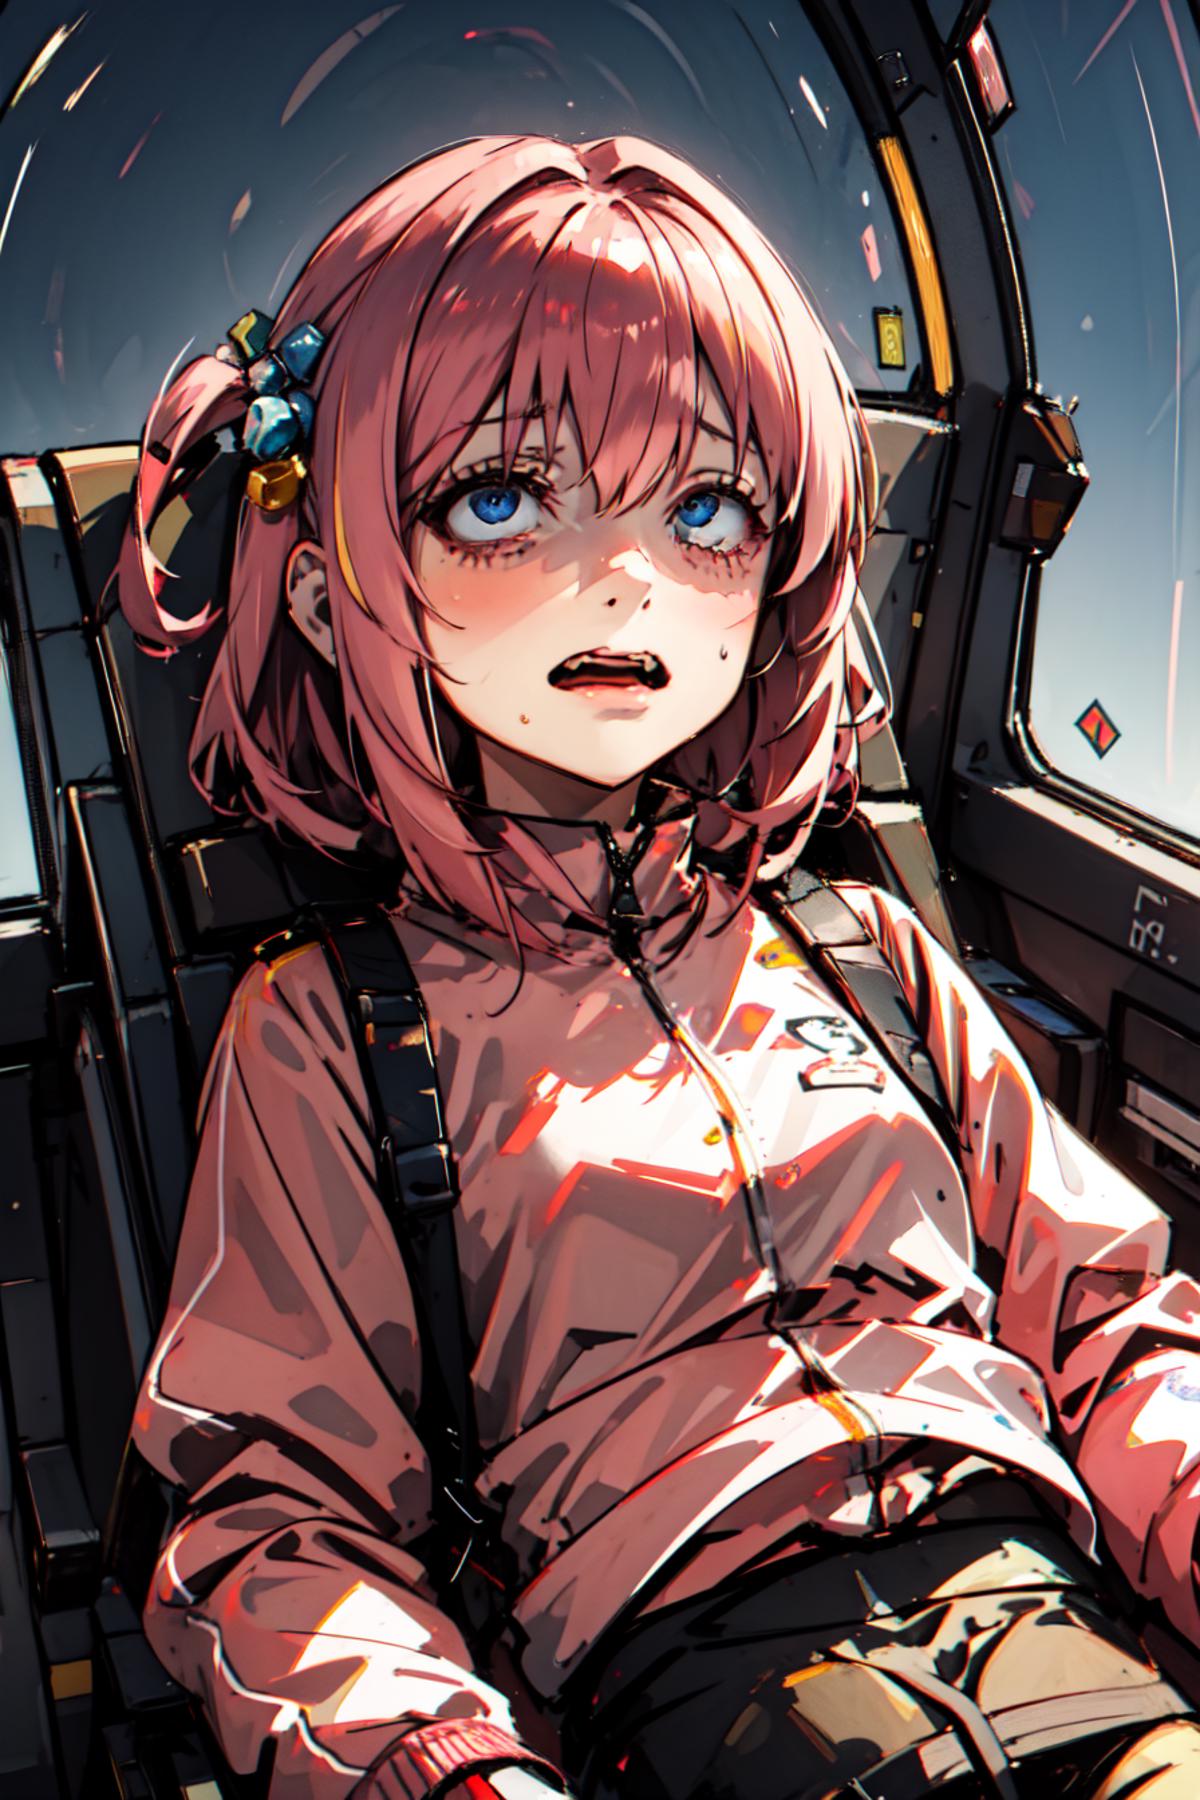 Anime Character with Pink Hair and Pink Jacket Sitting in a Seat.